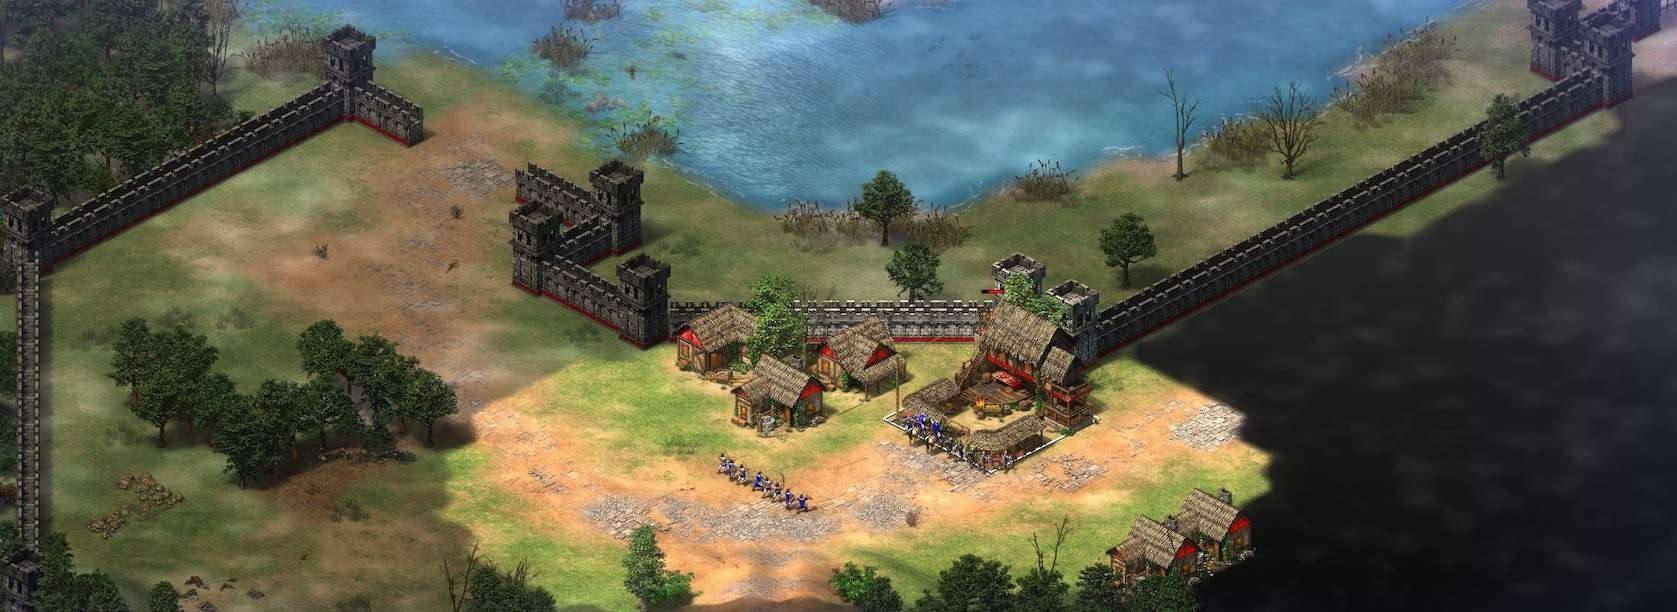 Age Of Empires Ii Definitive Edition Offense Is The Best Defense Achievement Guide